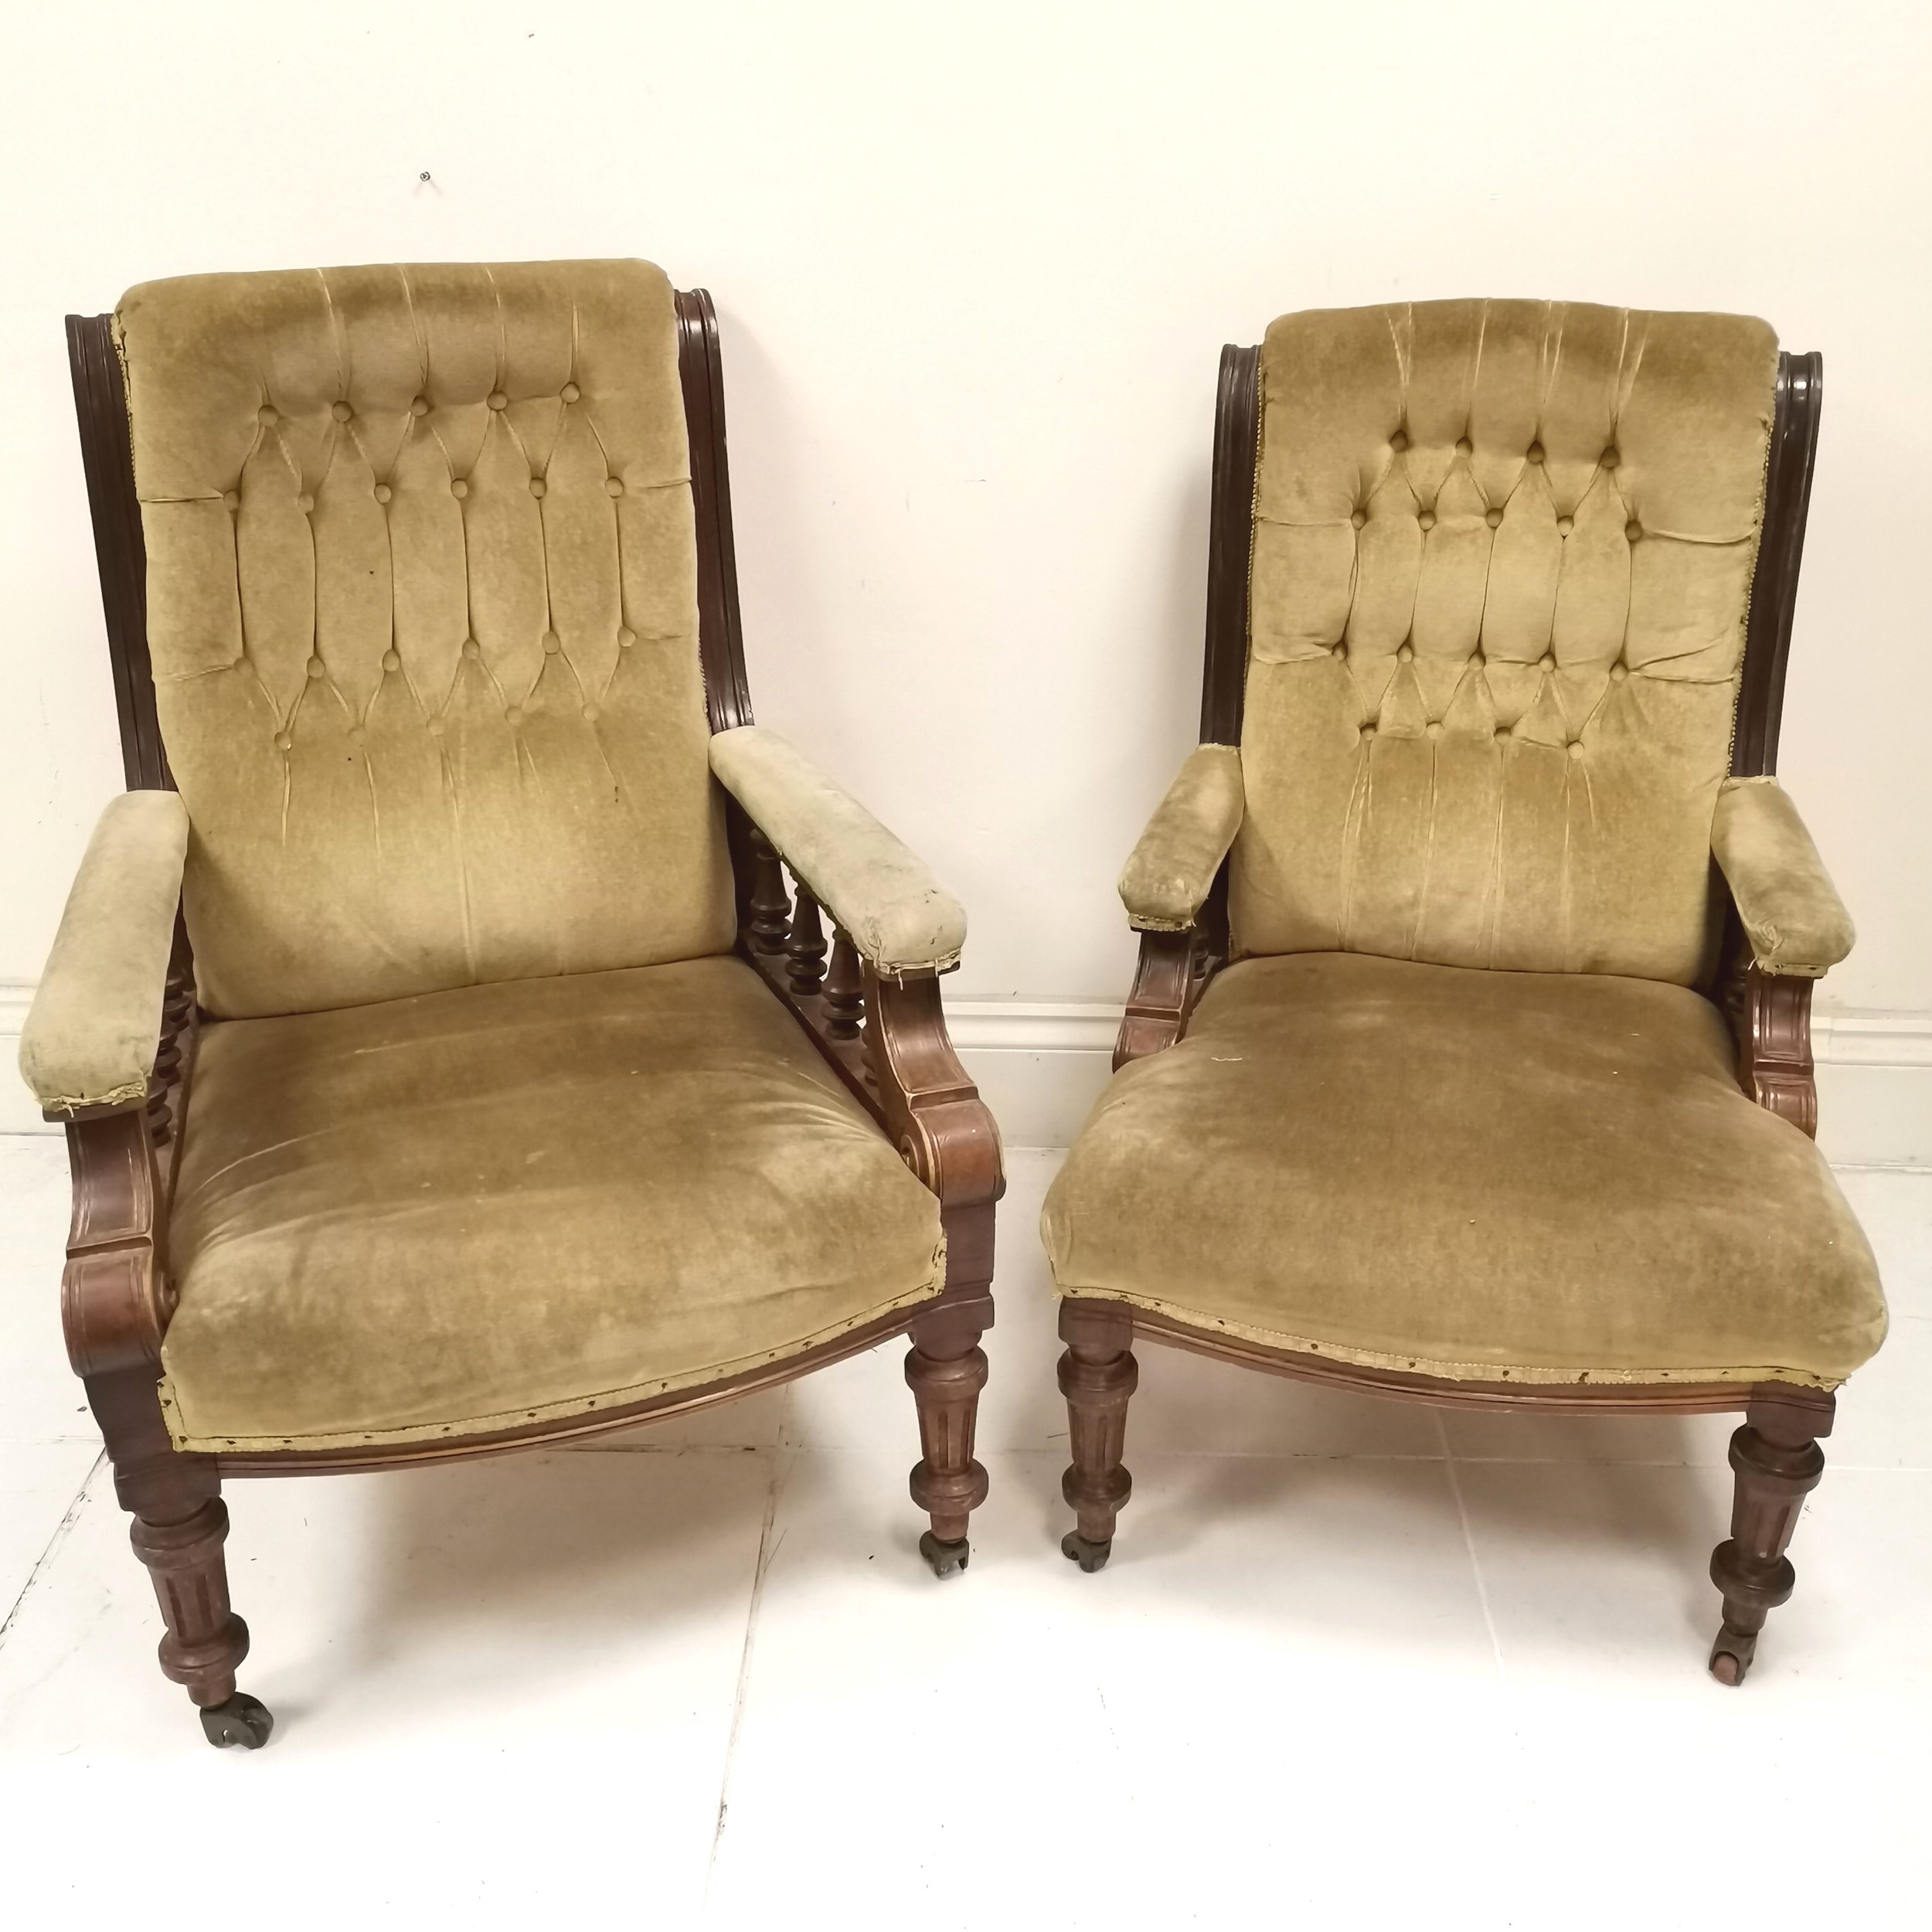 Pair of Antique mahogany framed button and scroll back Library chairs, upholstered in a light